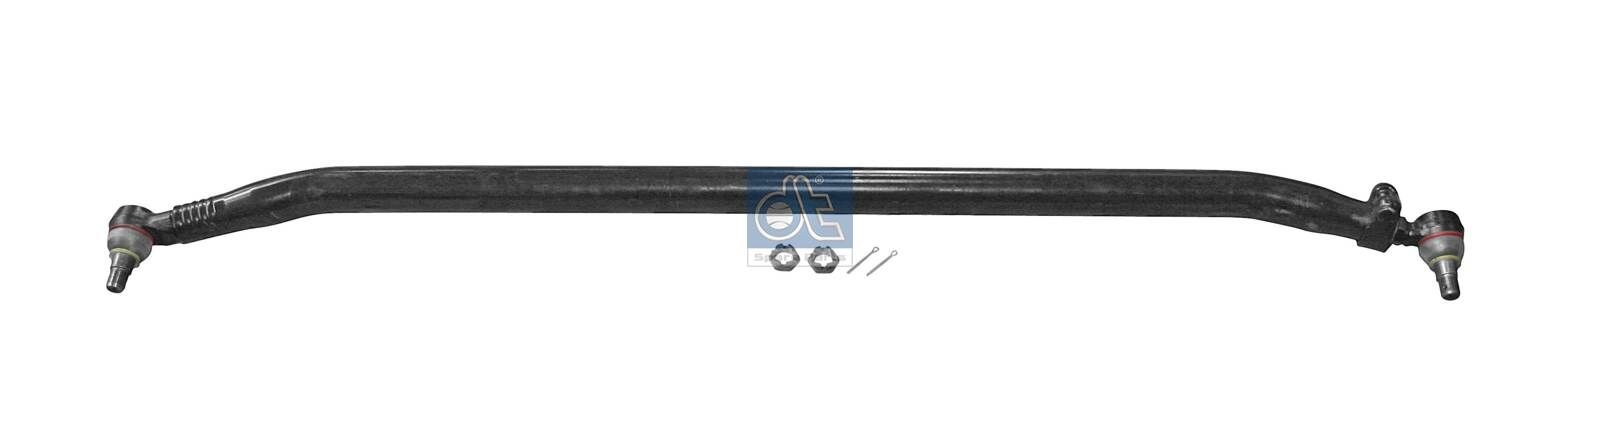 DT Spare Parts 6.53021 Rod Assembly 7422163637